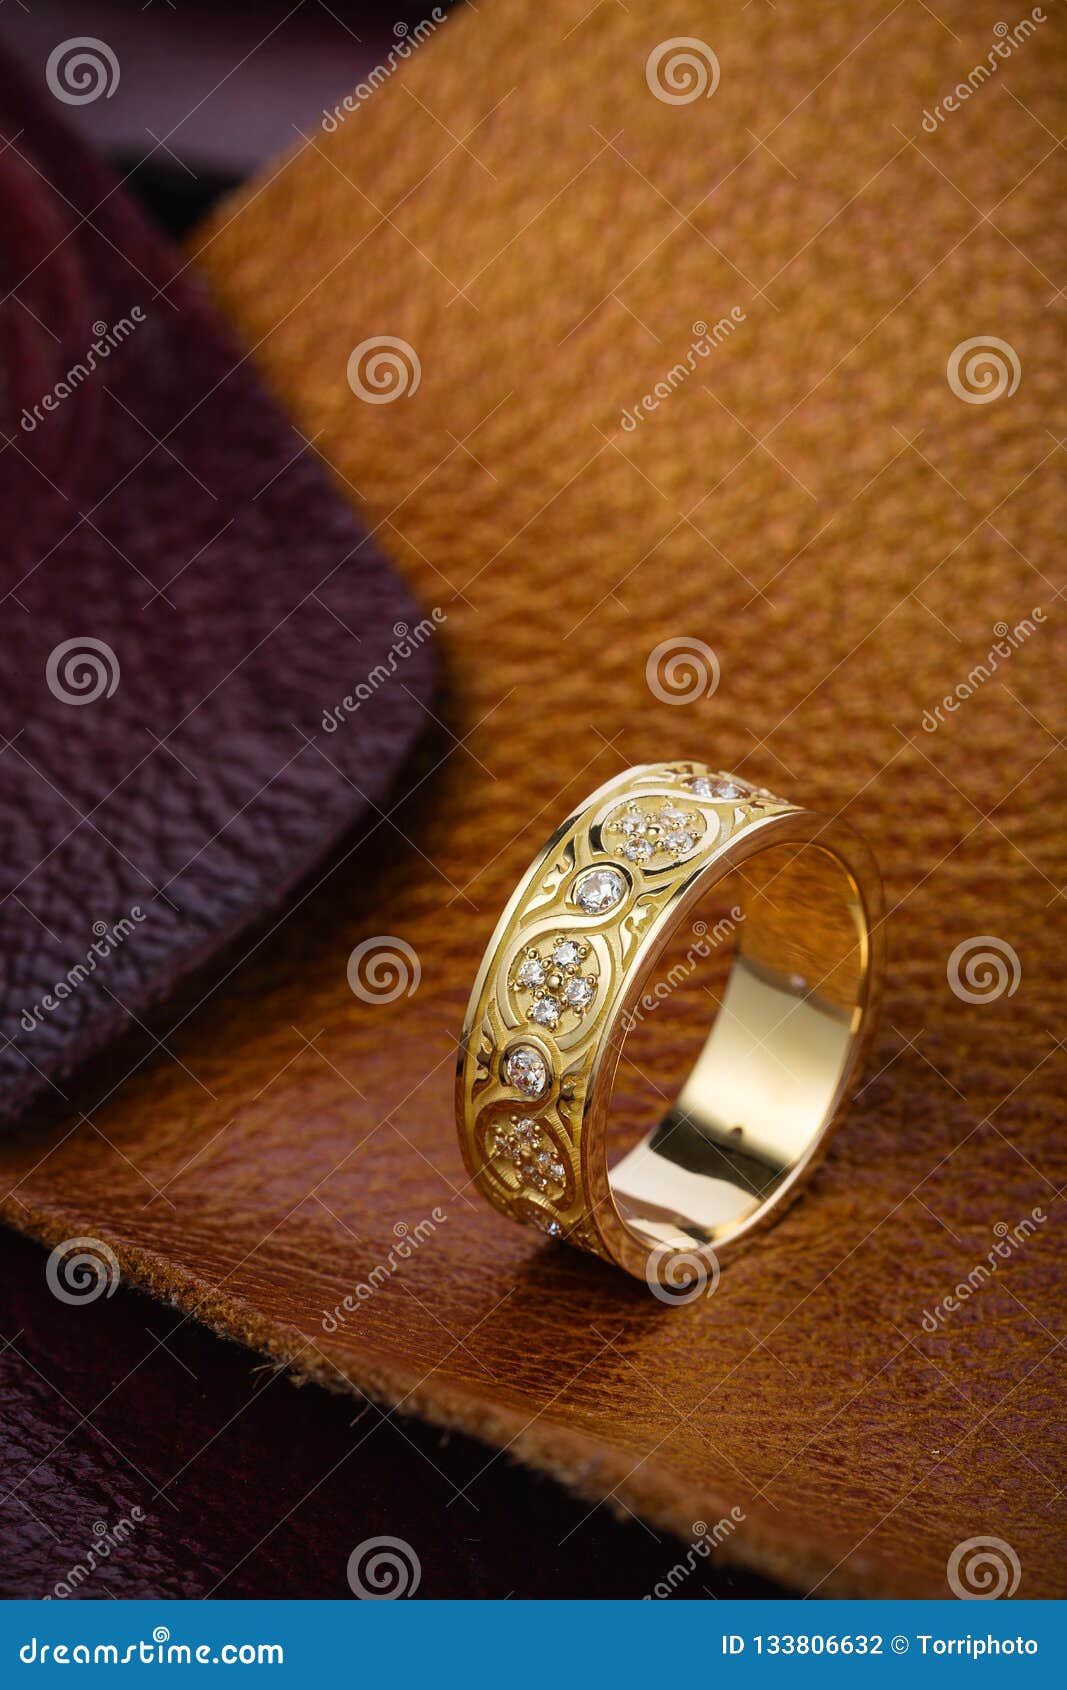 Buy quality Gold Two Finger Culcutti Bridal ring in Ahmedabad